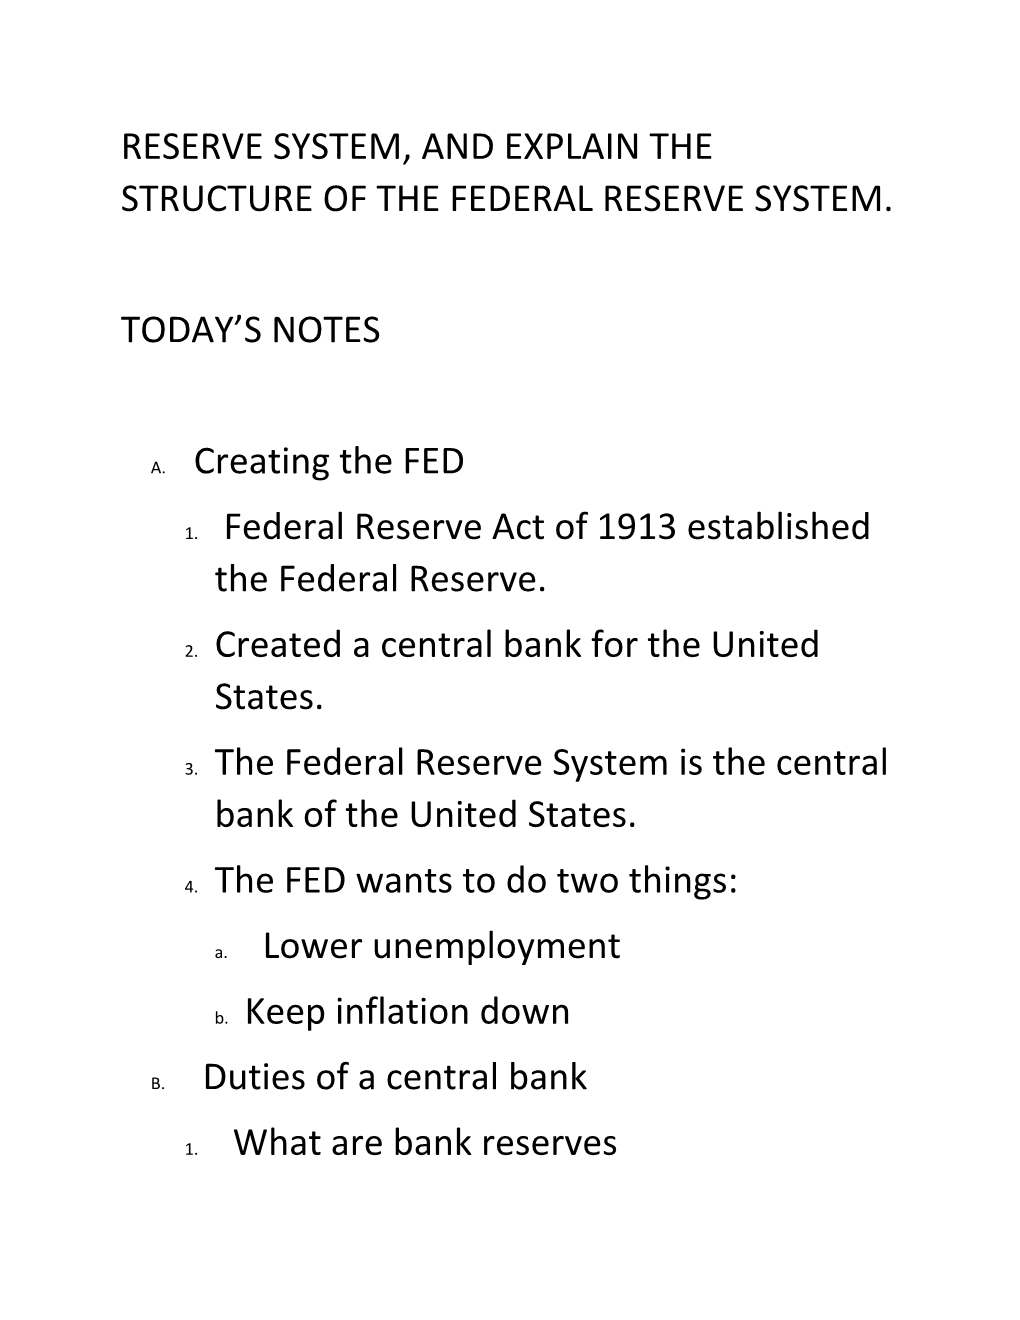 The Federal Reserve and Monetary Policy